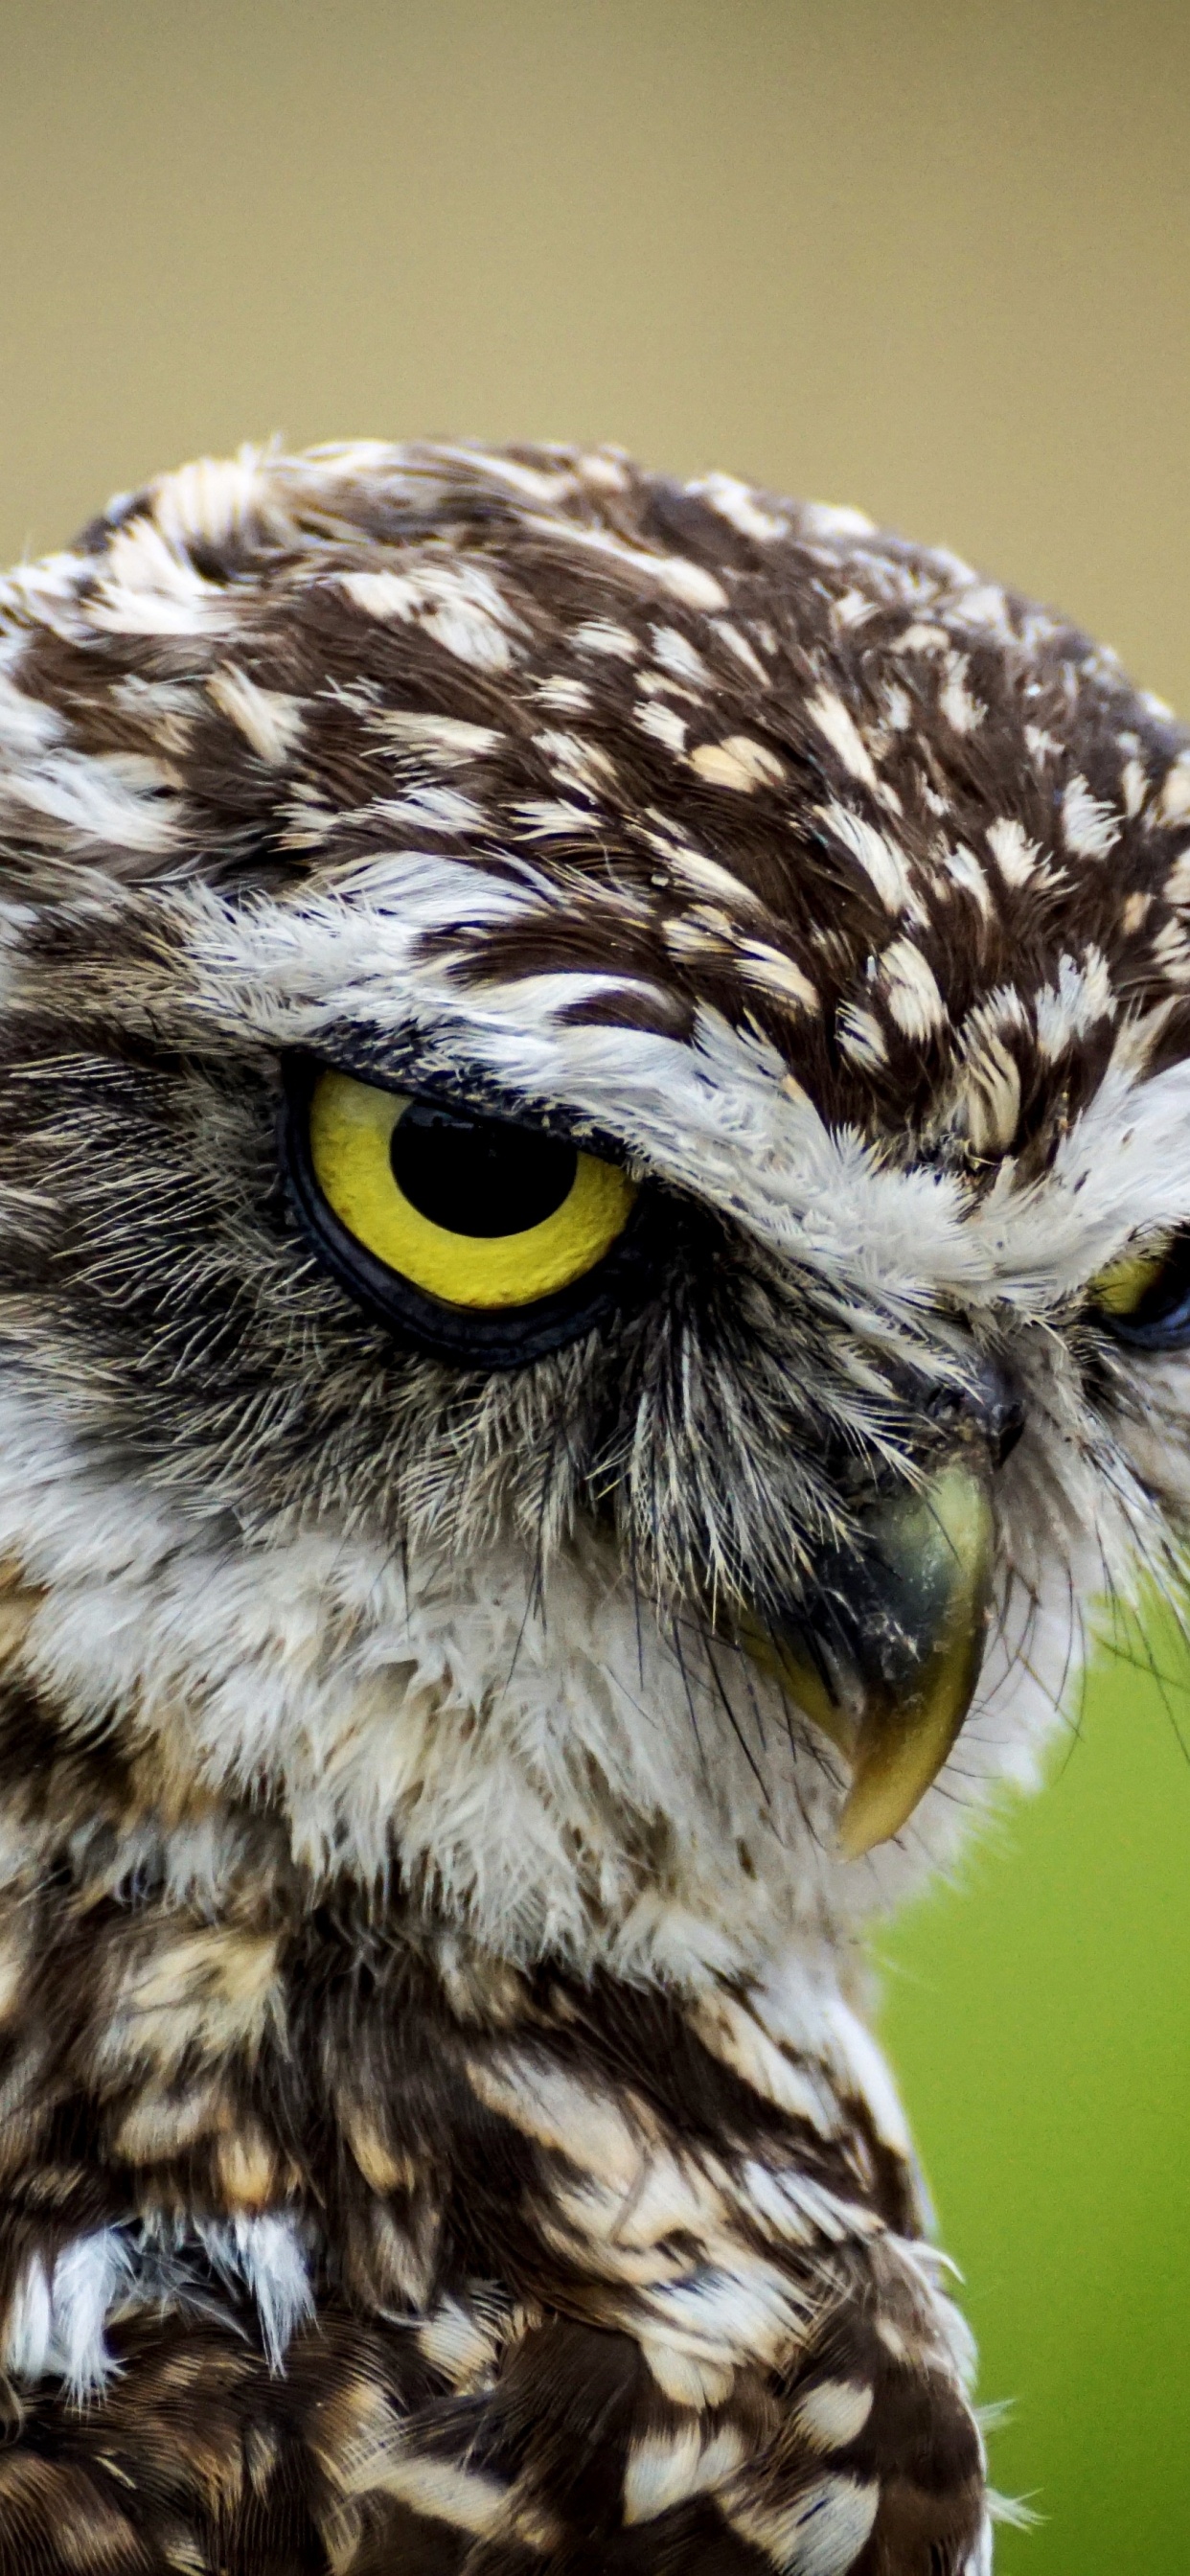 Brown and White Owl in Close up Photography During Daytime. Wallpaper in 1242x2688 Resolution